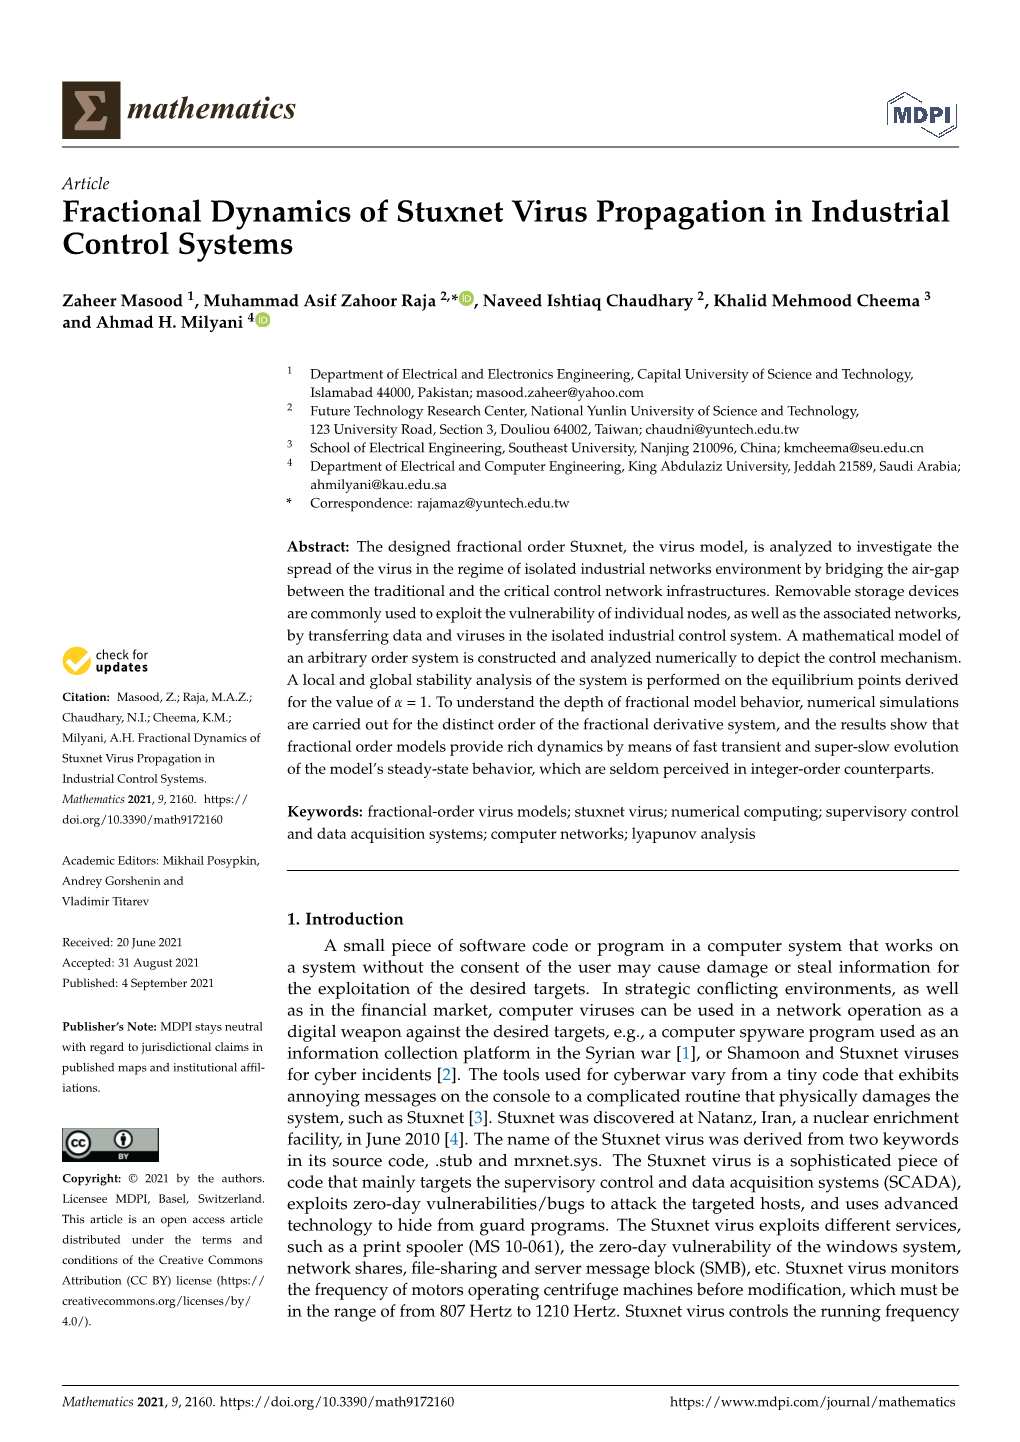 Fractional Dynamics of Stuxnet Virus Propagation in Industrial Control Systems